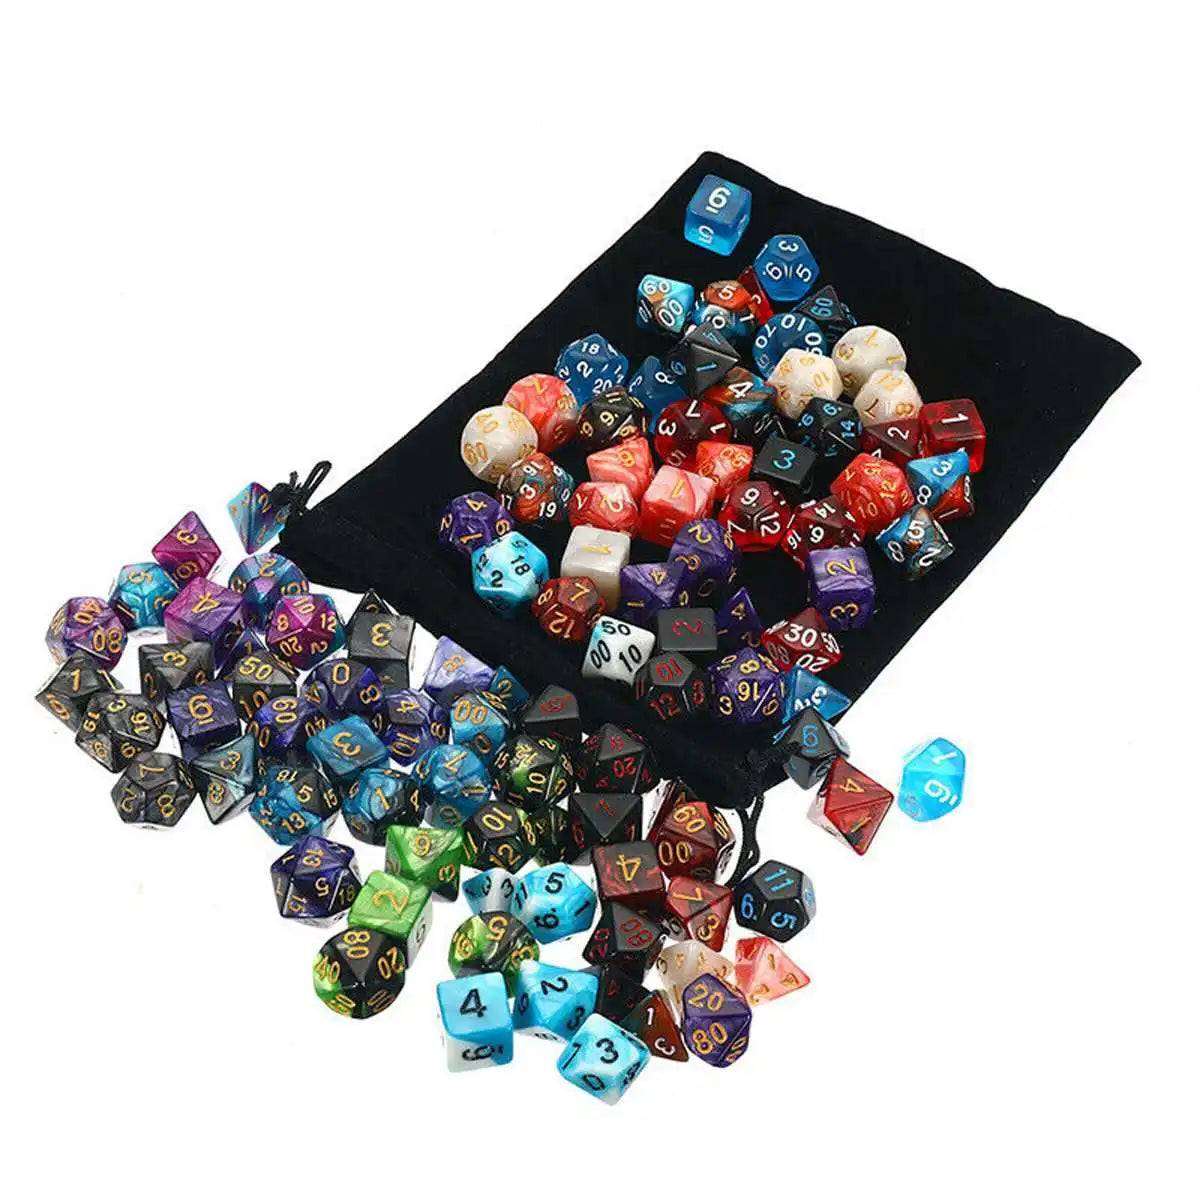 105Pcs Polyhedral Dice Set DND RPG Role Playing Dragon Table Game Mixed Color Set +Storage Bags